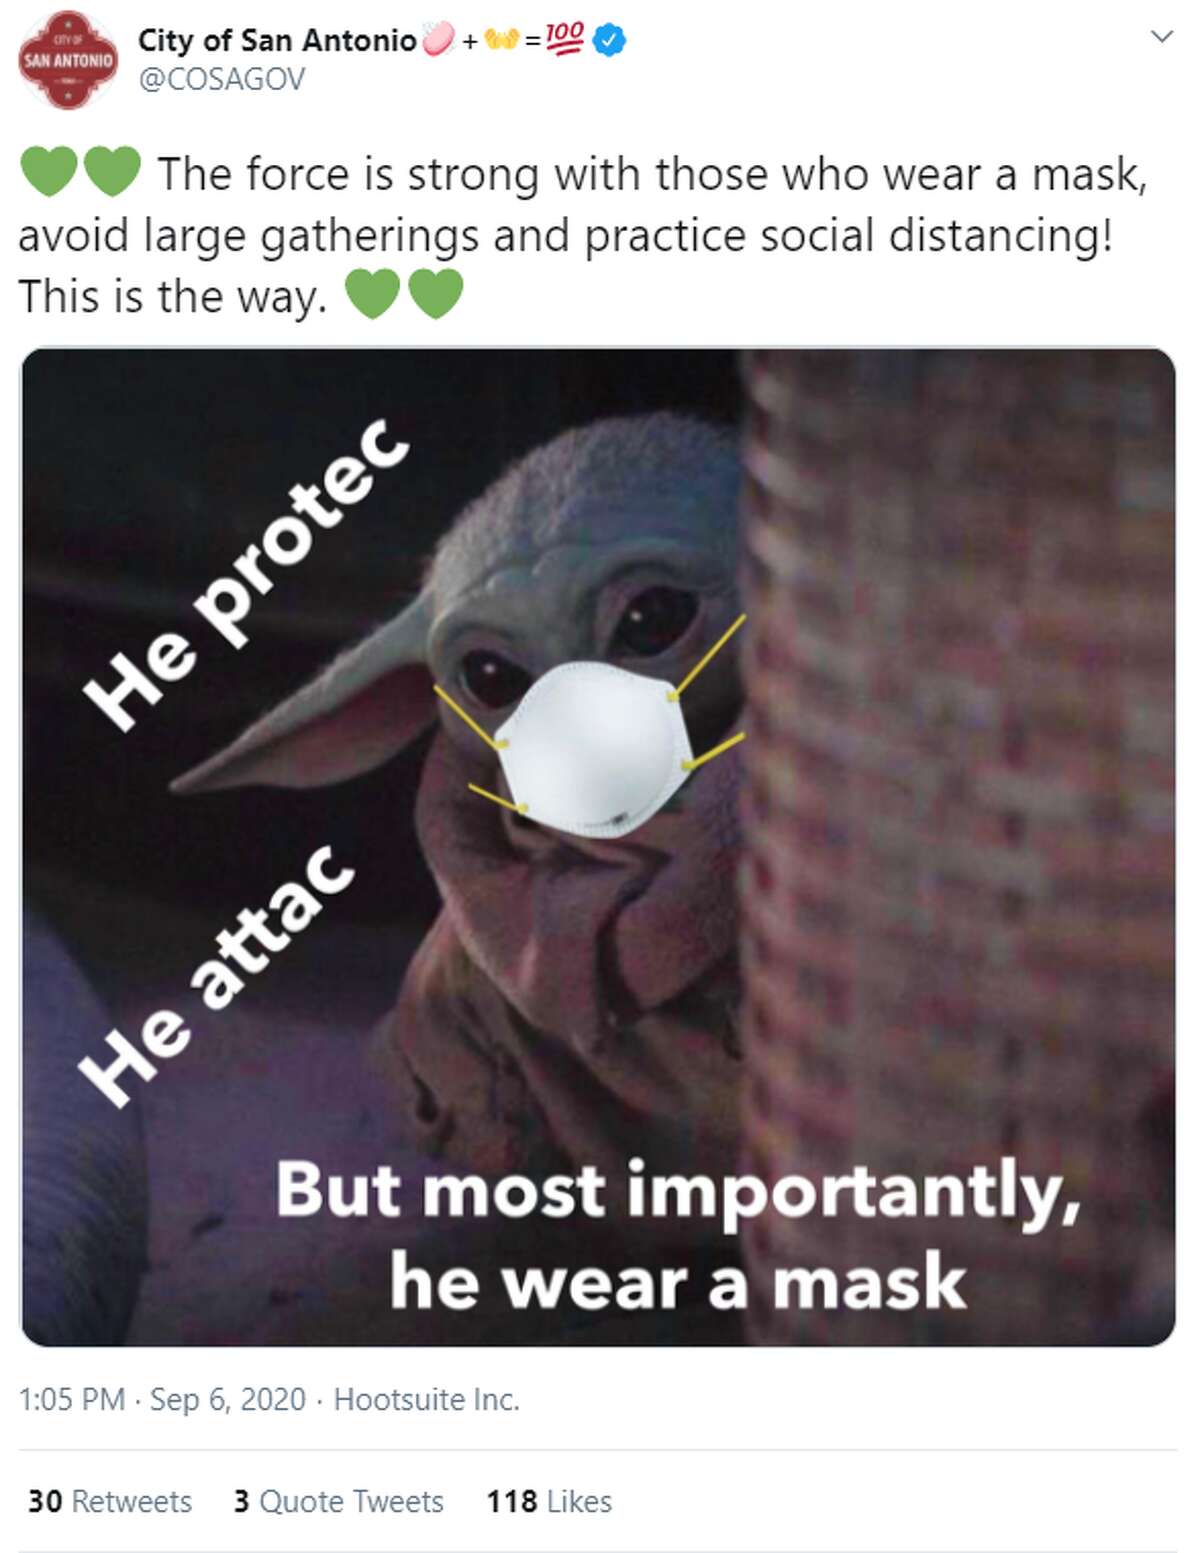 On Sunday, the City of San Antonio posted a Yoda meme, writing that "the force is strong with those who wear a mask."